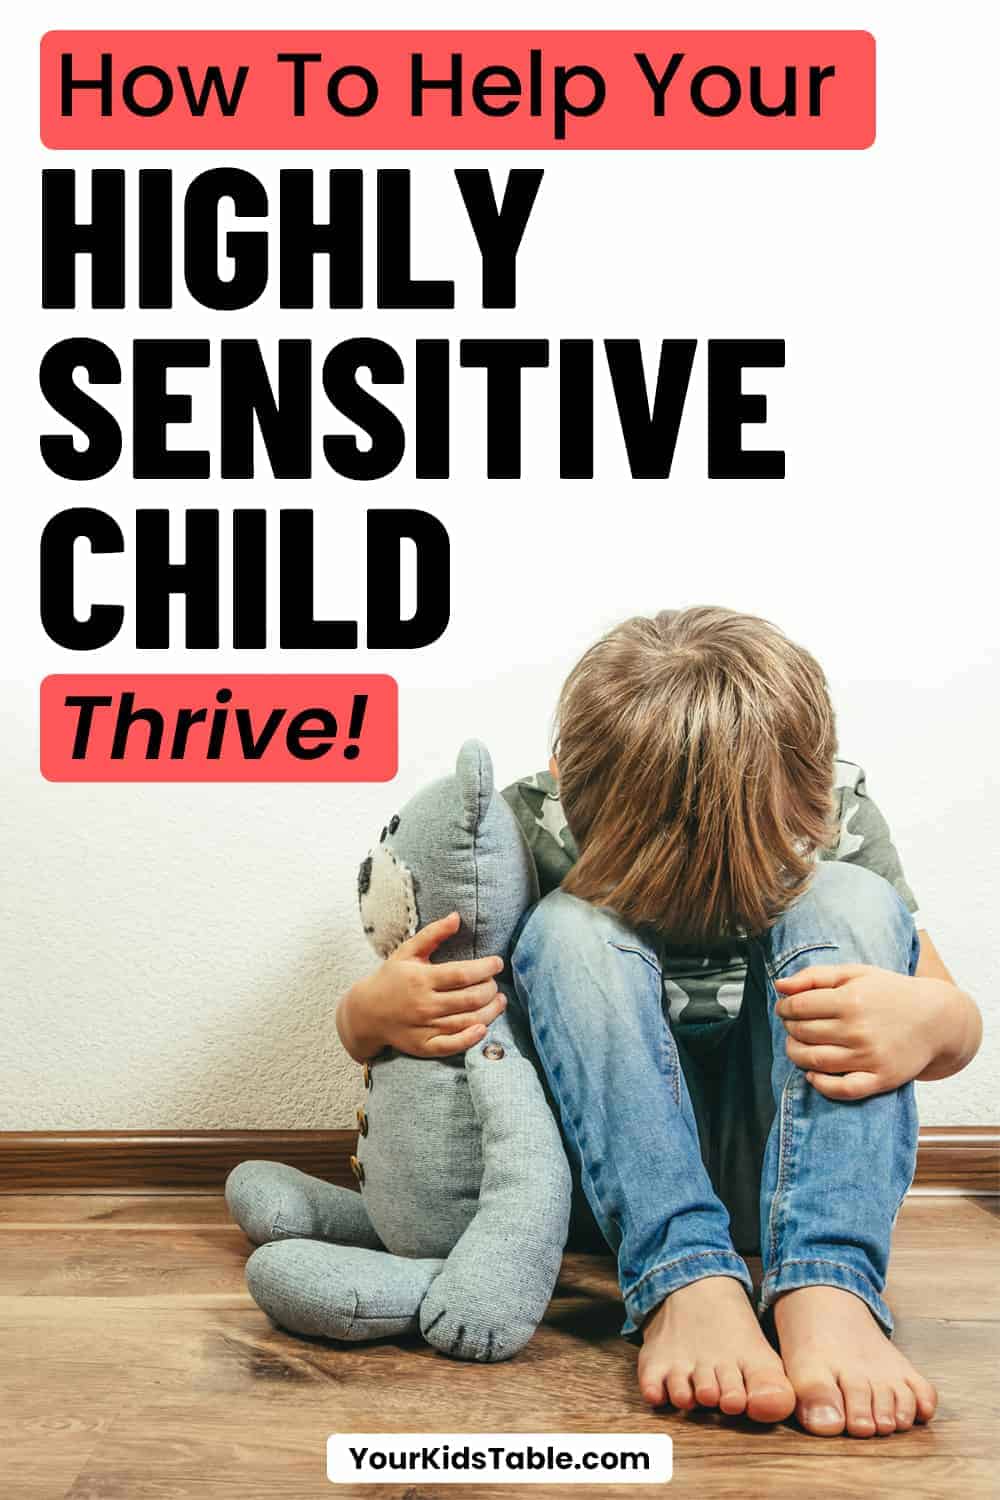 20+ signs of a highly sensitive child that often feels and experiences the world deeply and with more sensitivity. Learn how sensory sensitivities also play a role and what you can do to help your child cope with these challenges.